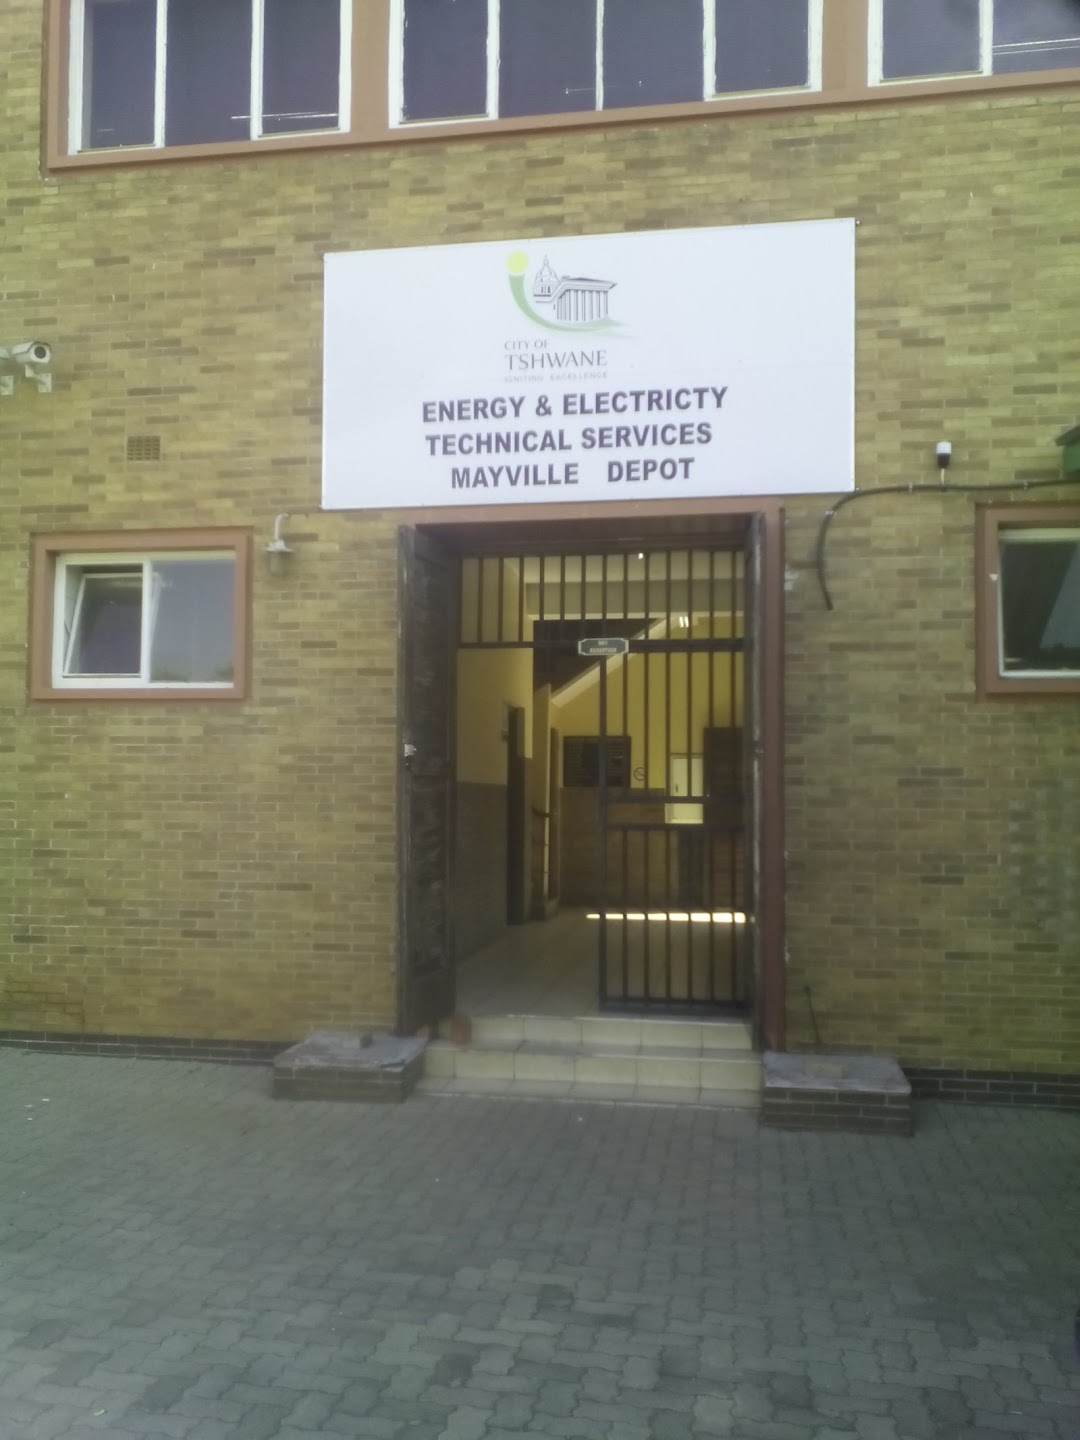 City Of Tshwane Energy & Electricity Technical Services